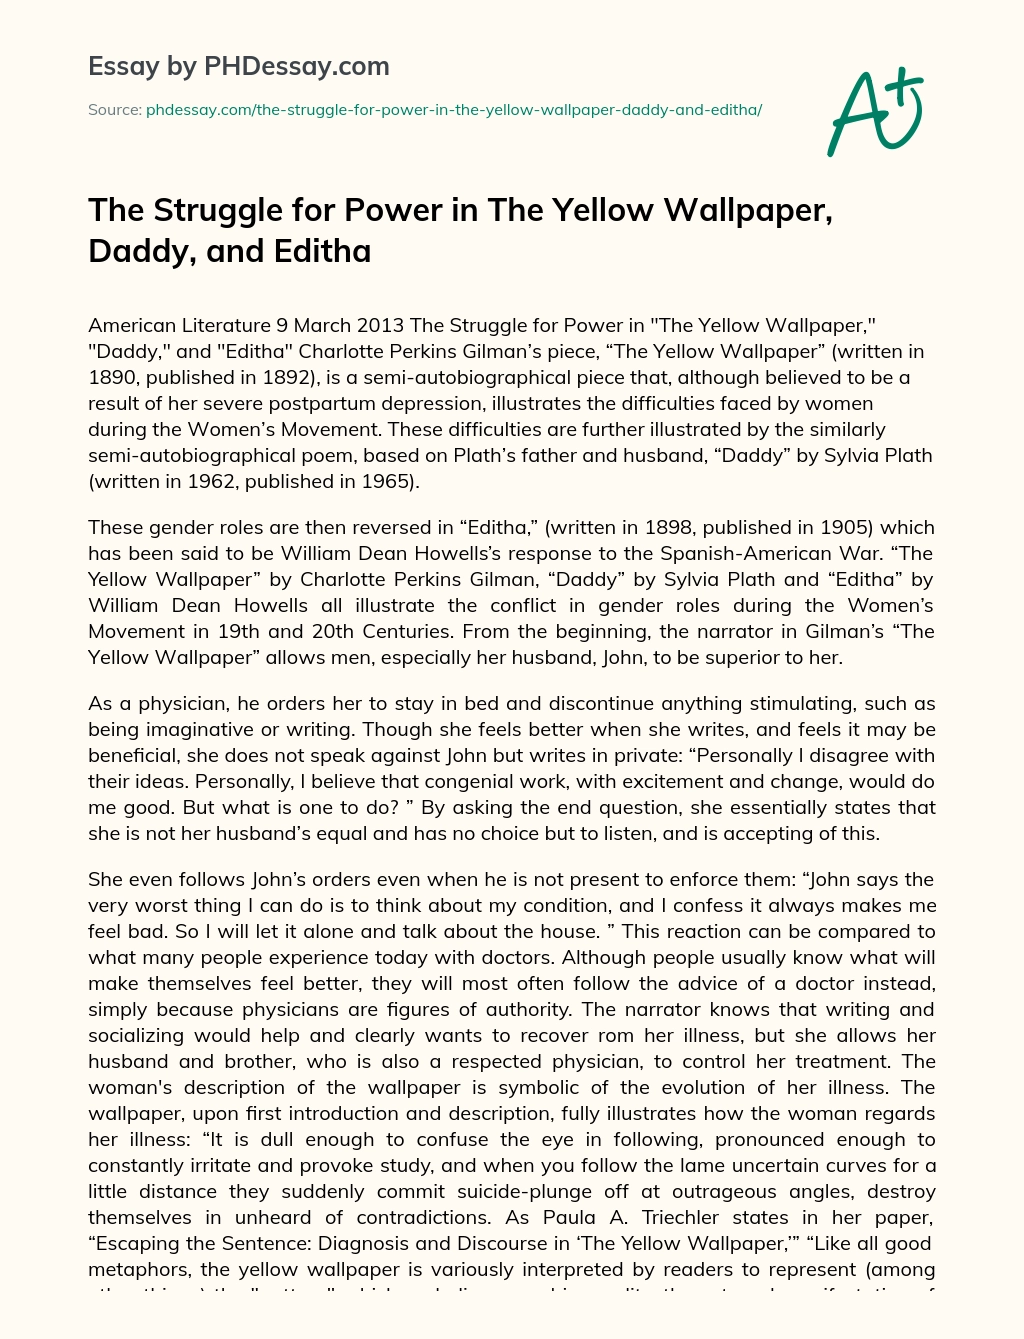 The Struggle for Power in The Yellow Wallpaper,  Daddy,  and Editha essay